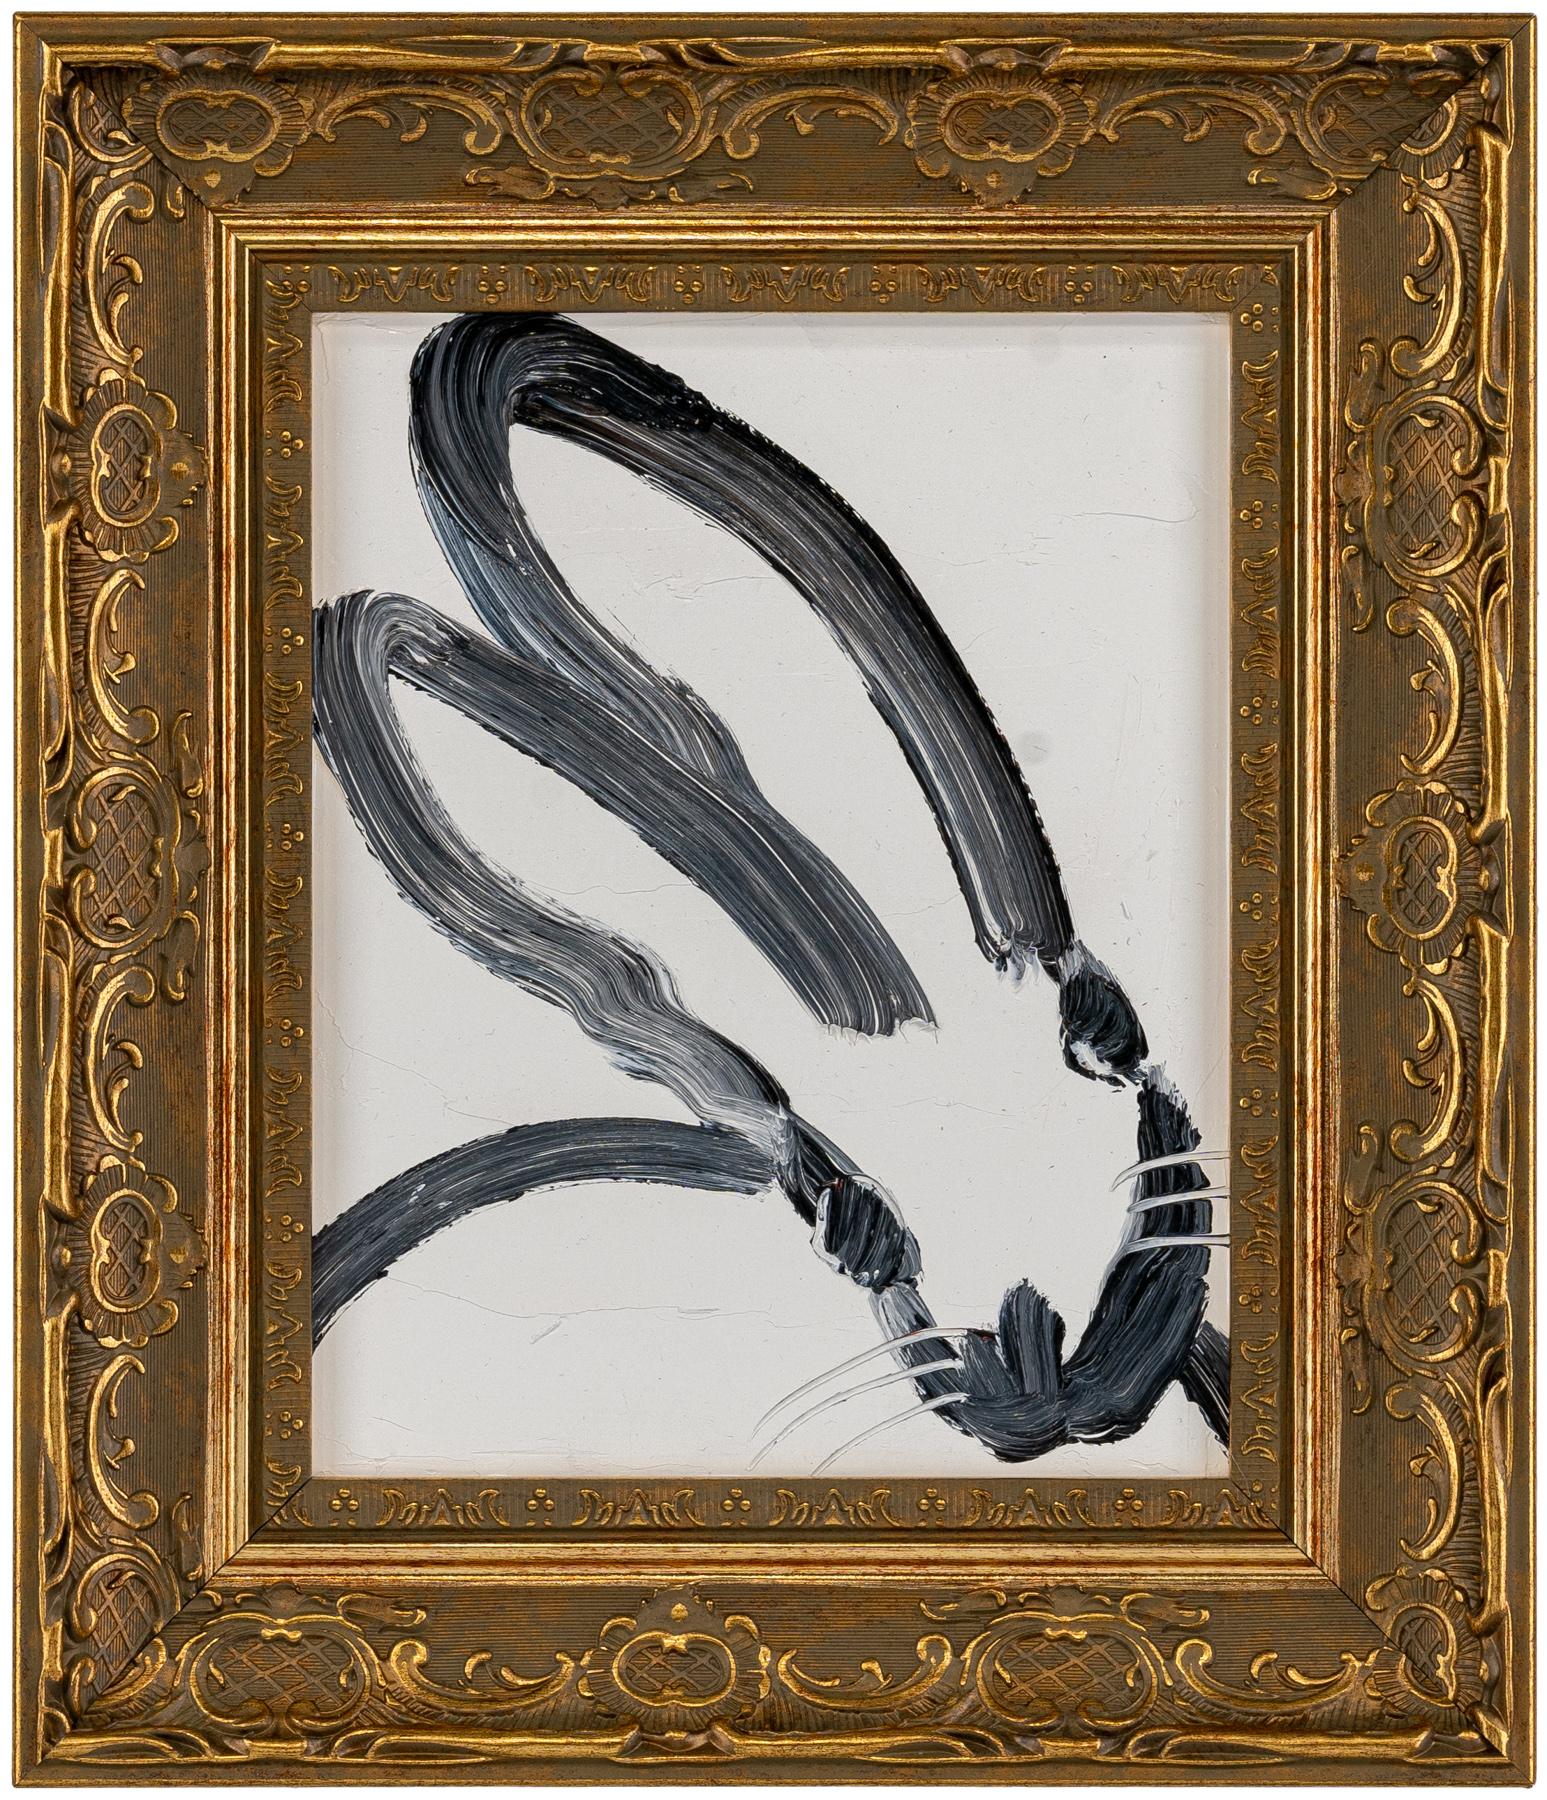 Hunt Slonem "Winter" White Bunny
A gestured bunny rabbit in black on a white background. Framed in a vintage gold frame.

Unframed: 10 x 8 inches
Framed: 14.5 x 12.5 inches
*Painting is framed - Please note Hunt Slonem paintings with frames may show